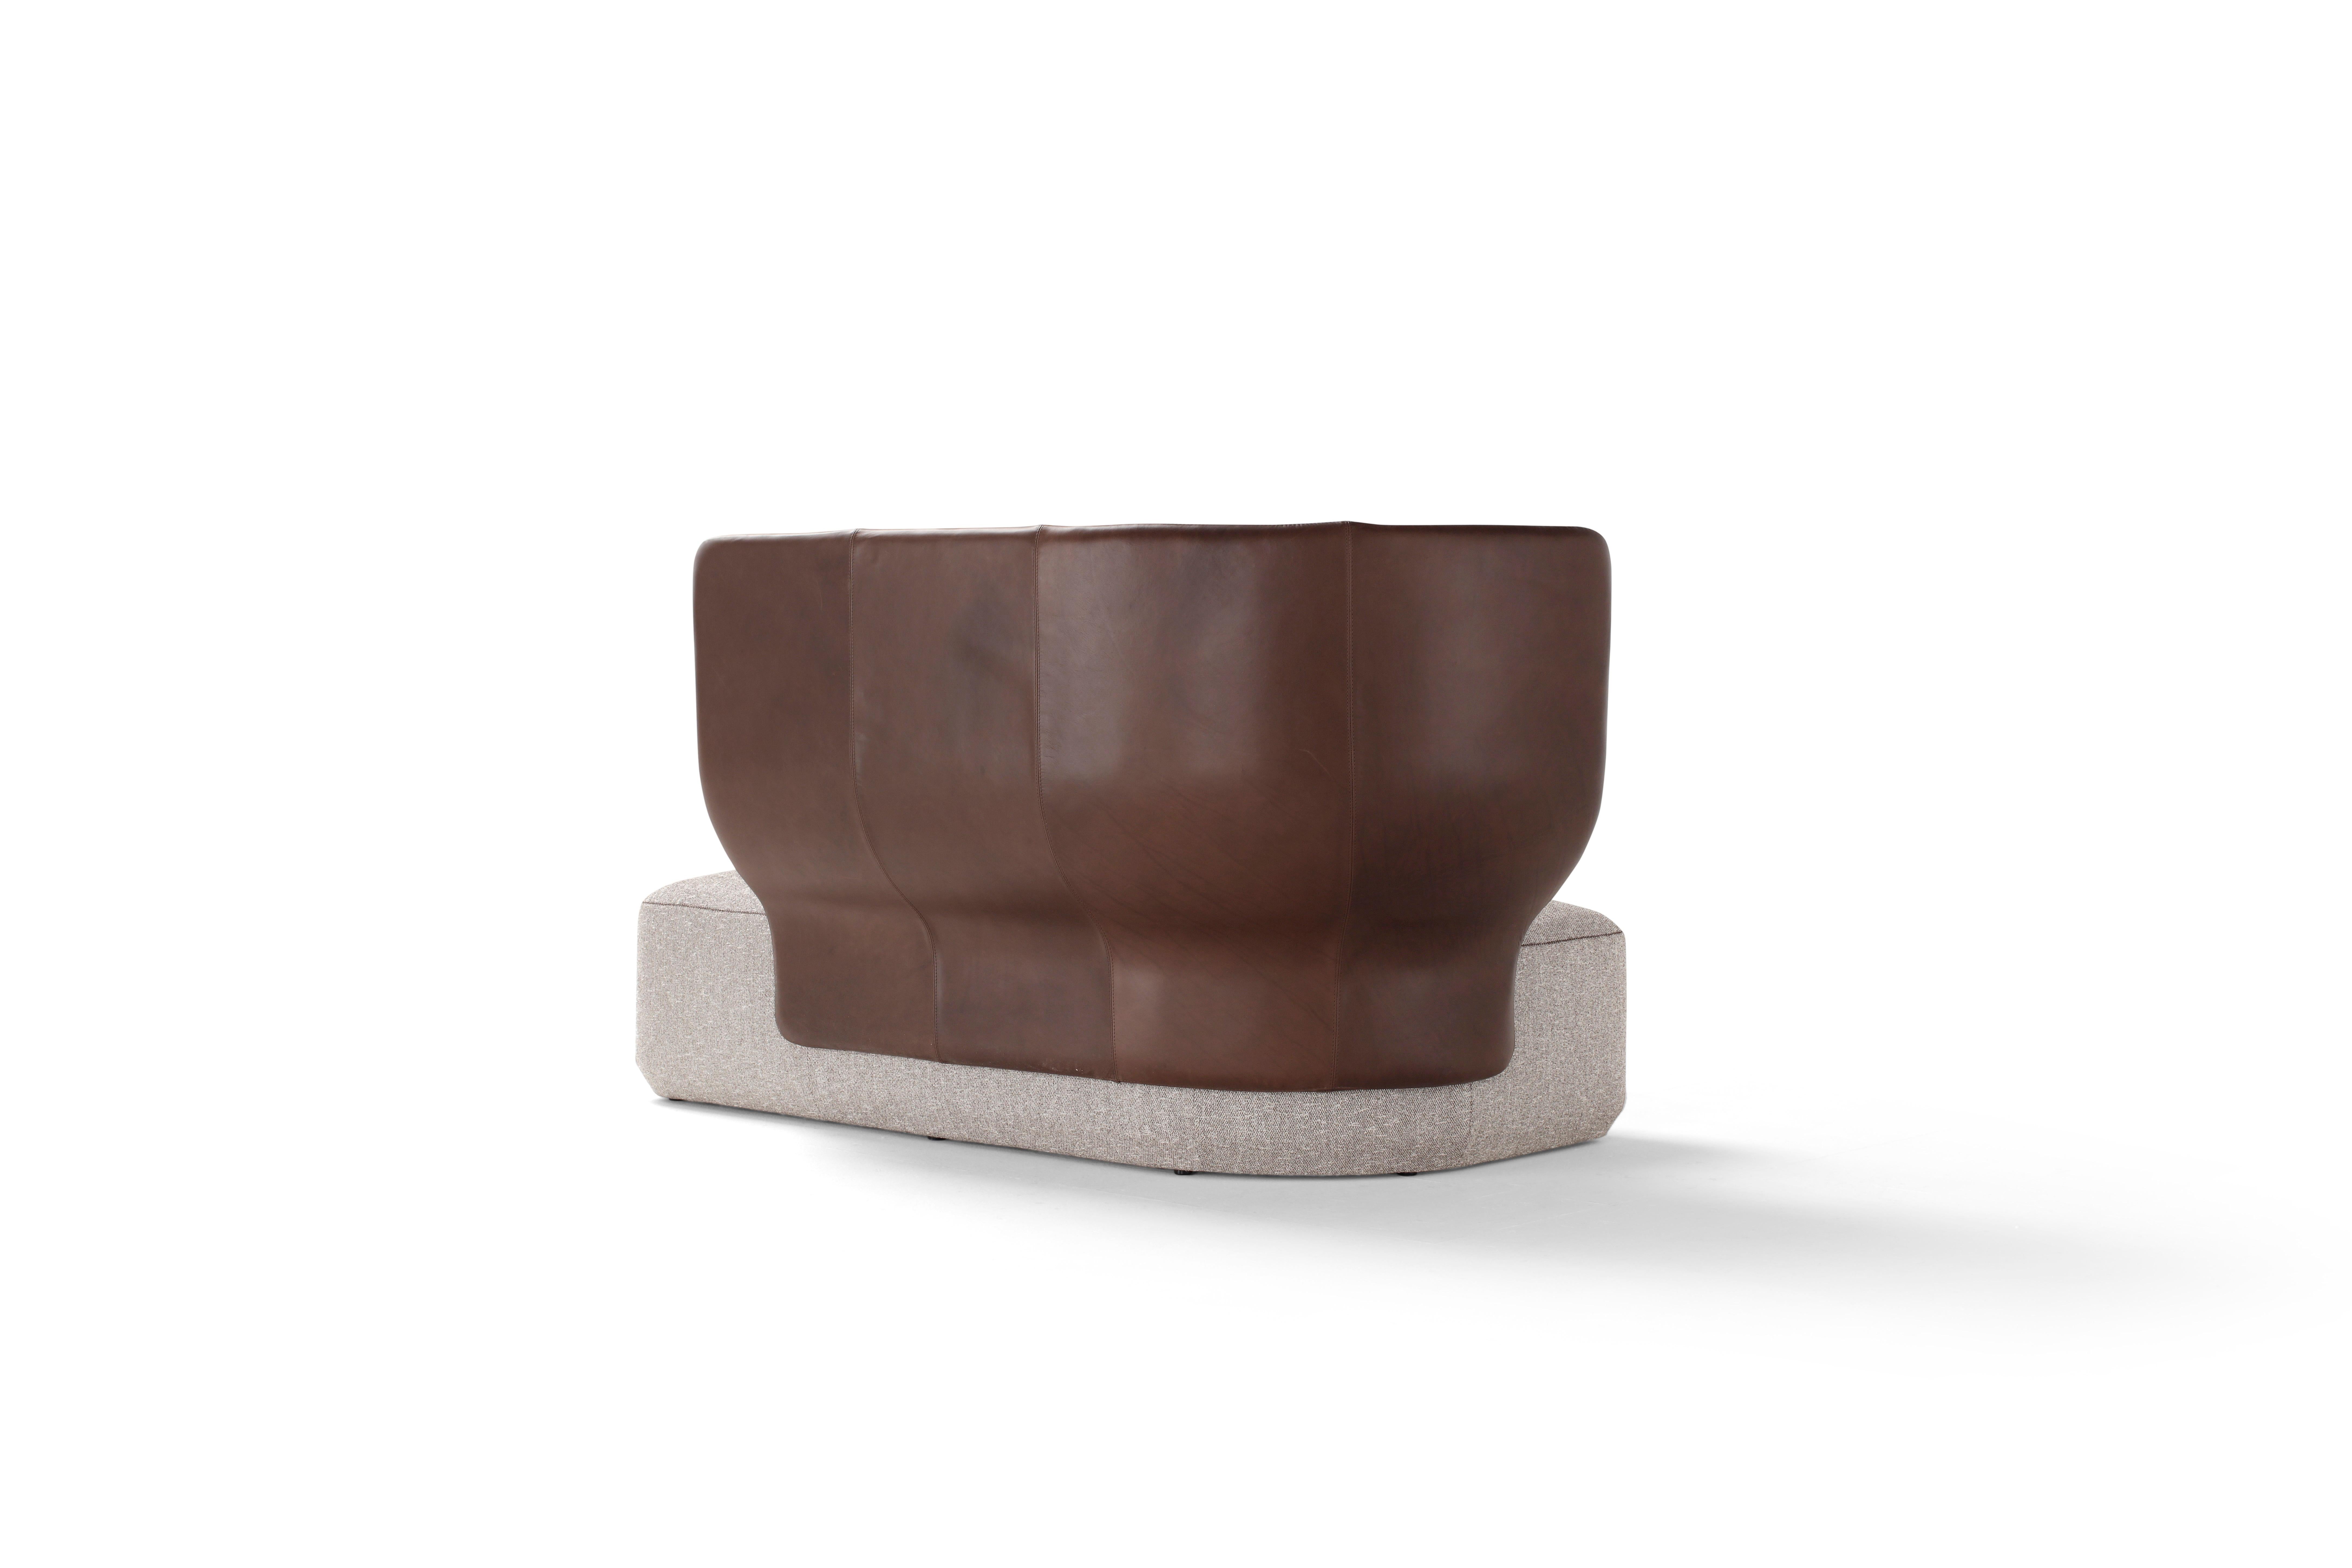 Amura 'Wazaa' Sofa in Brown Leather and Tan Velvet by Stefano Bigi For Sale 1